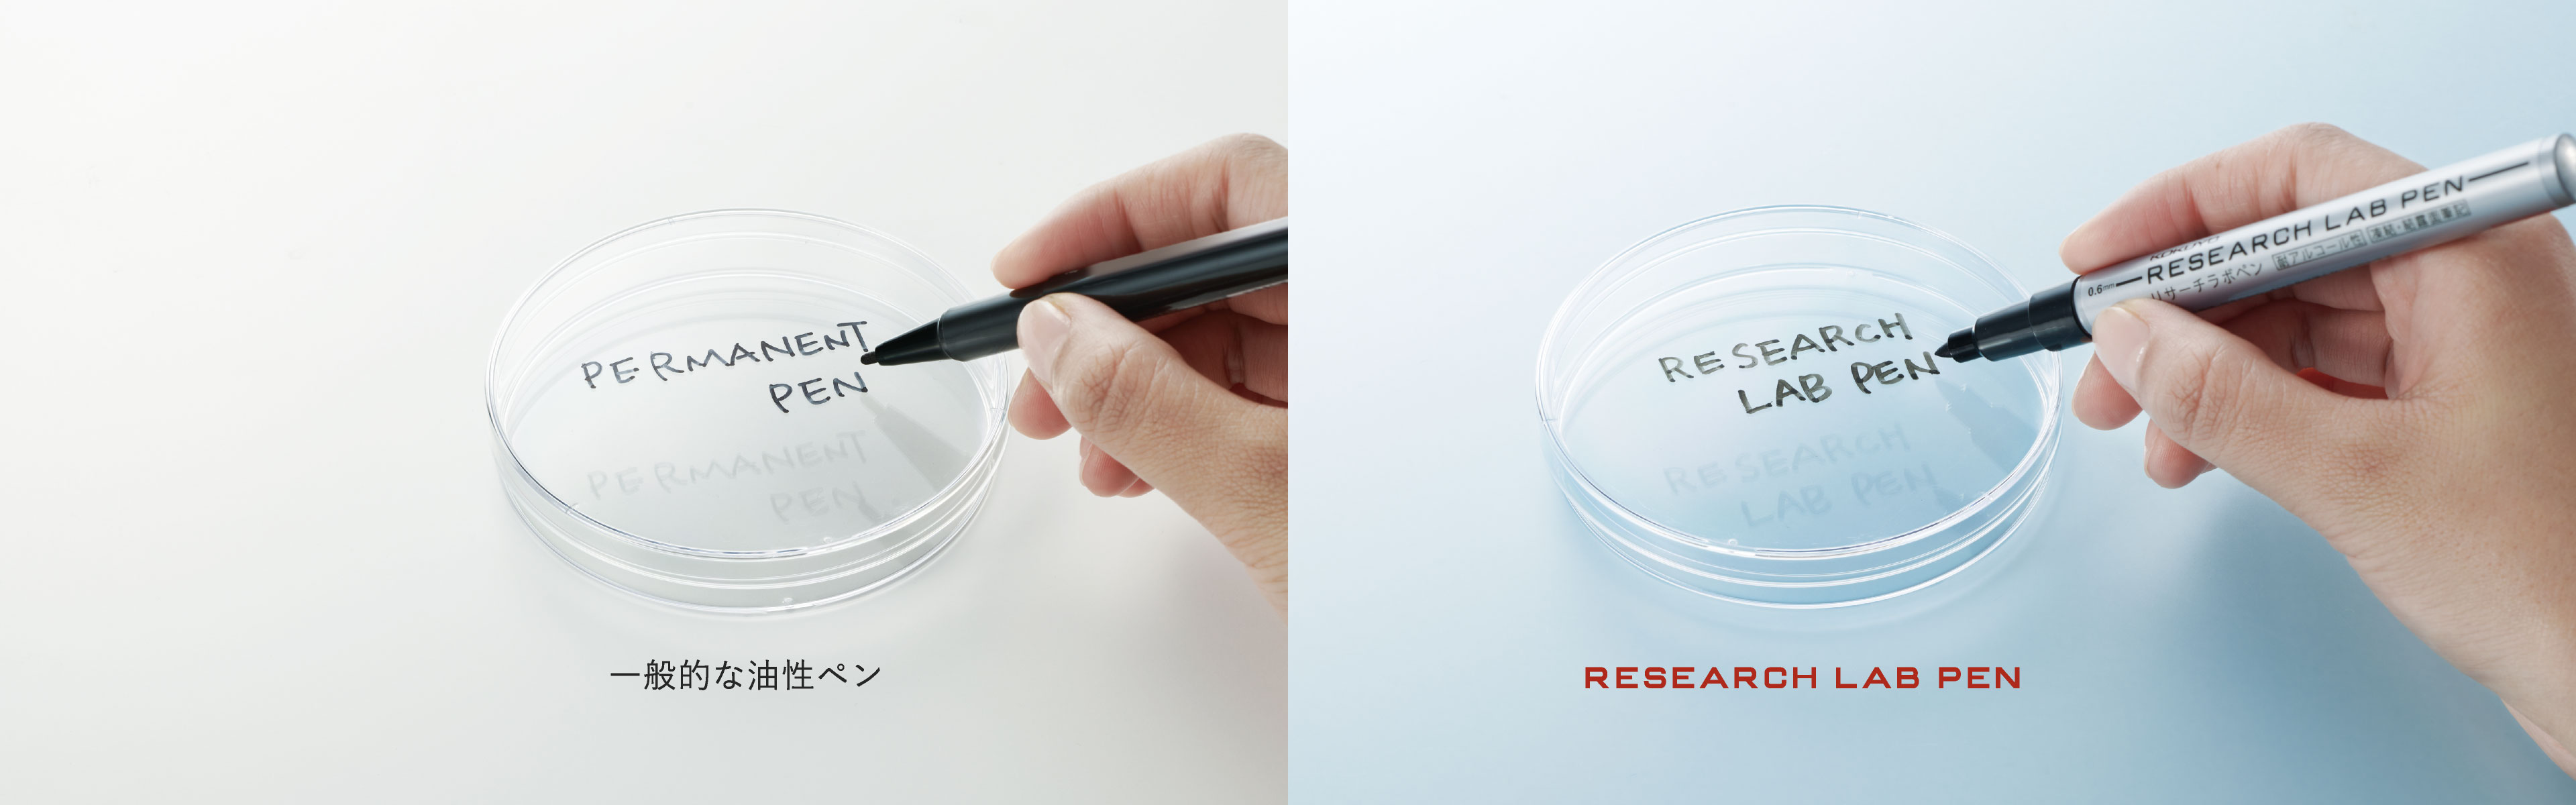 Research Lab Pen (alcohol-resistant type)